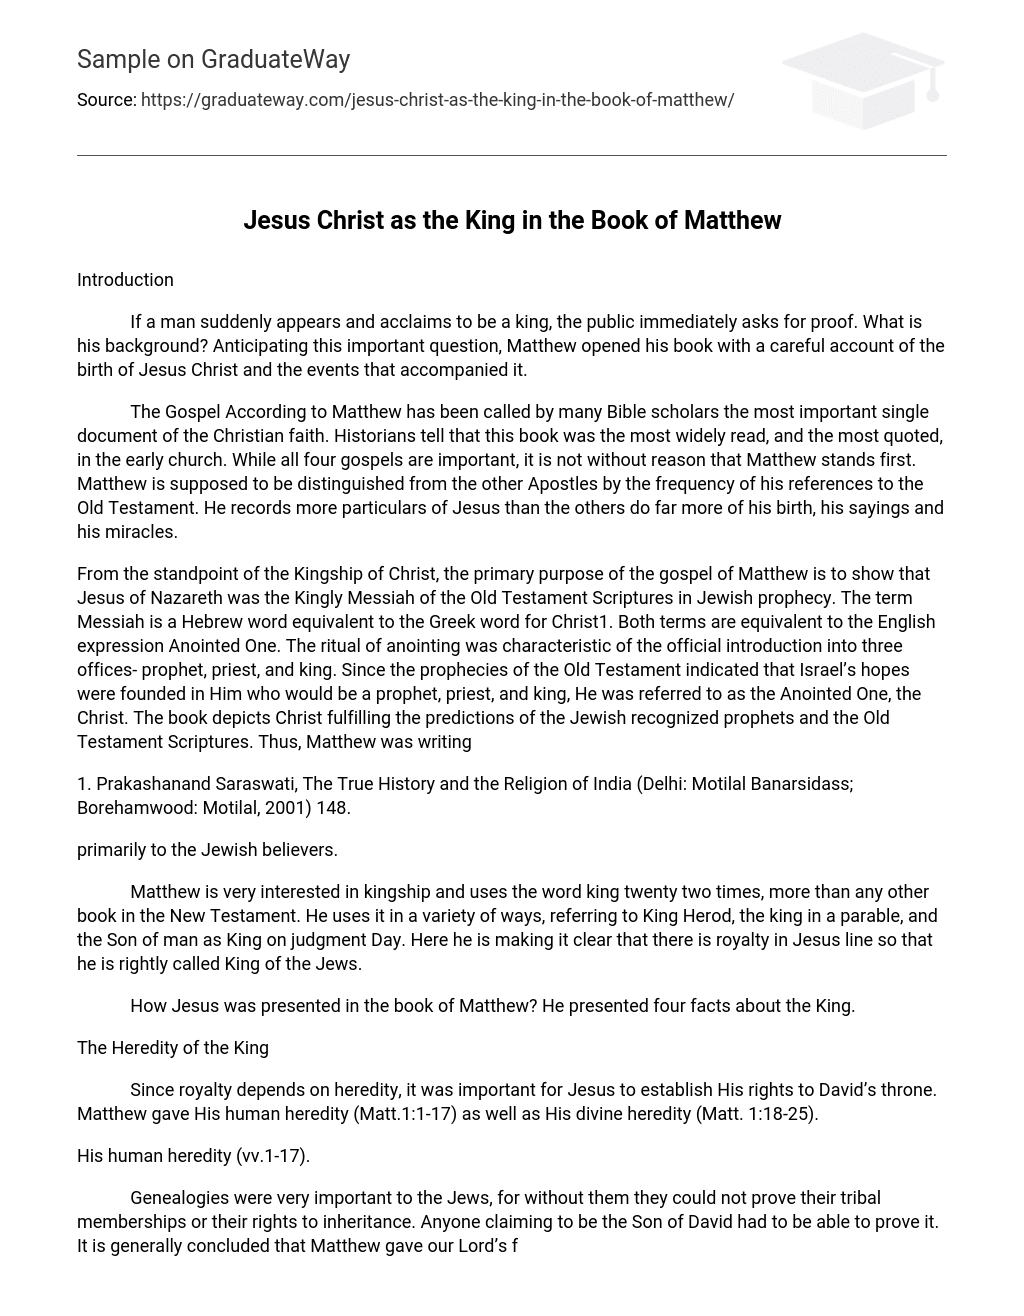 Jesus Christ as the King in the Book of Matthew